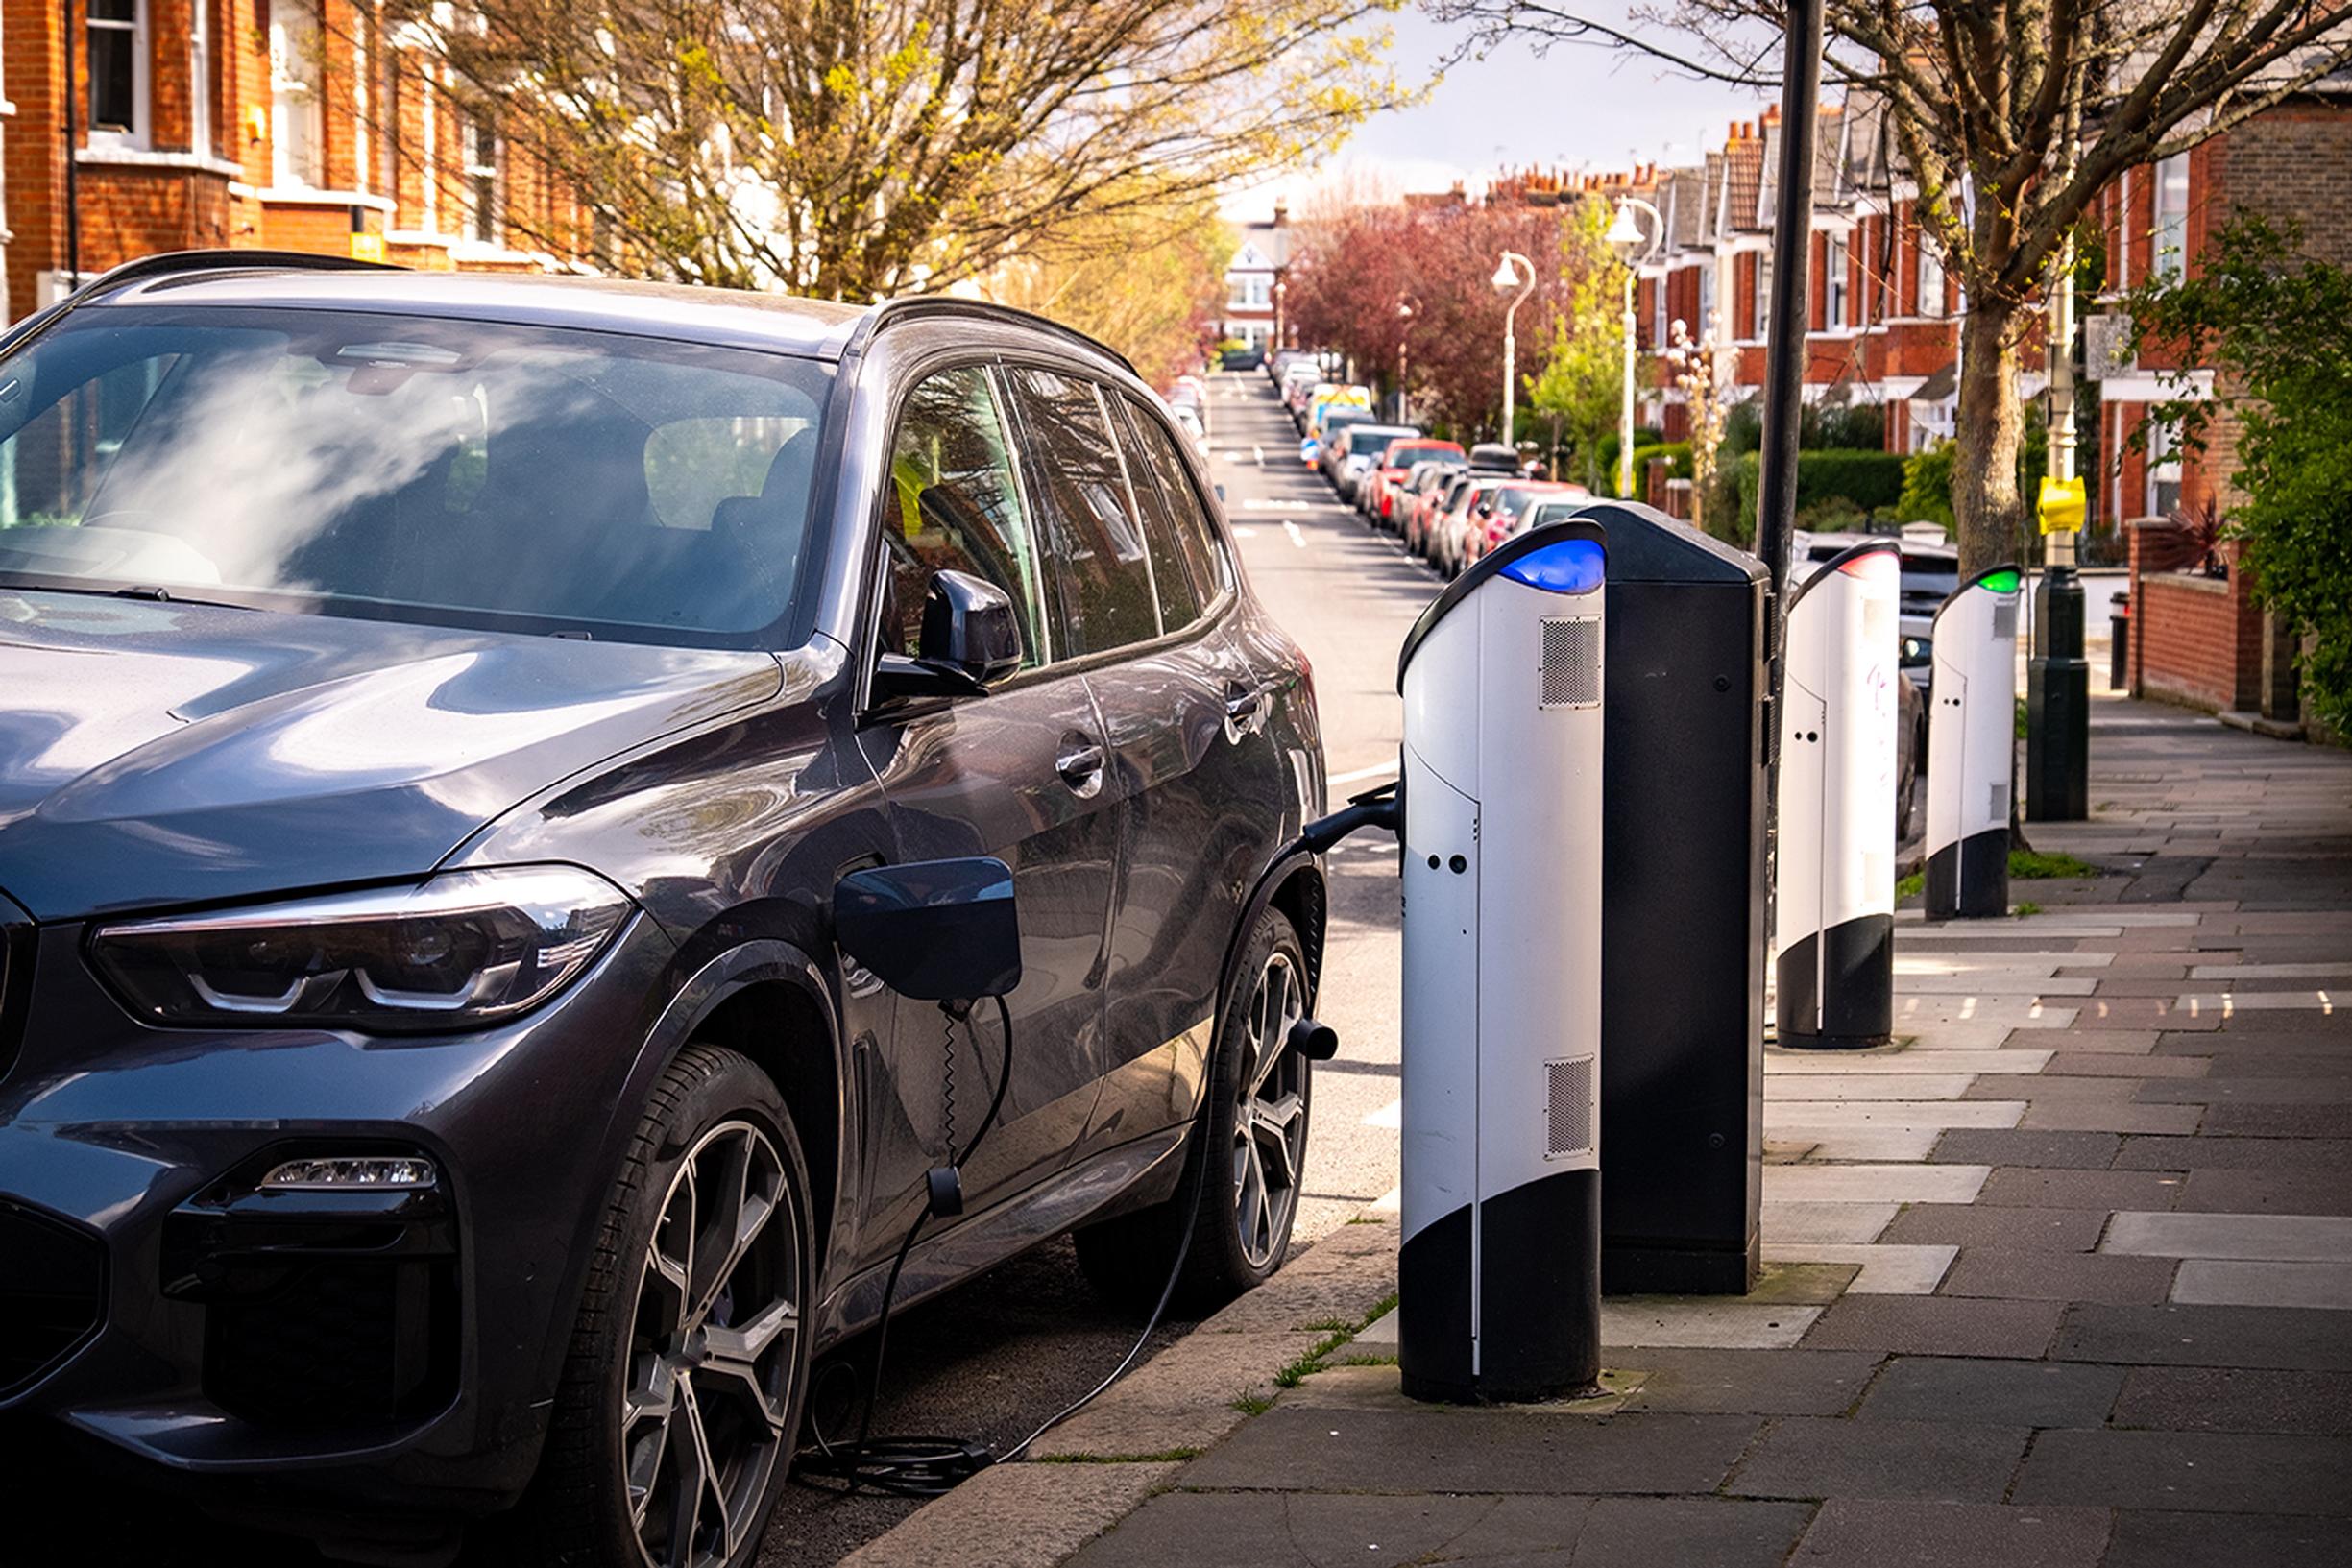 House of Lords Environment and Climate Change Committee has warned higher purchase costs, insufficient charging infrastructure and mixed messaging may deter from adopting EV cars